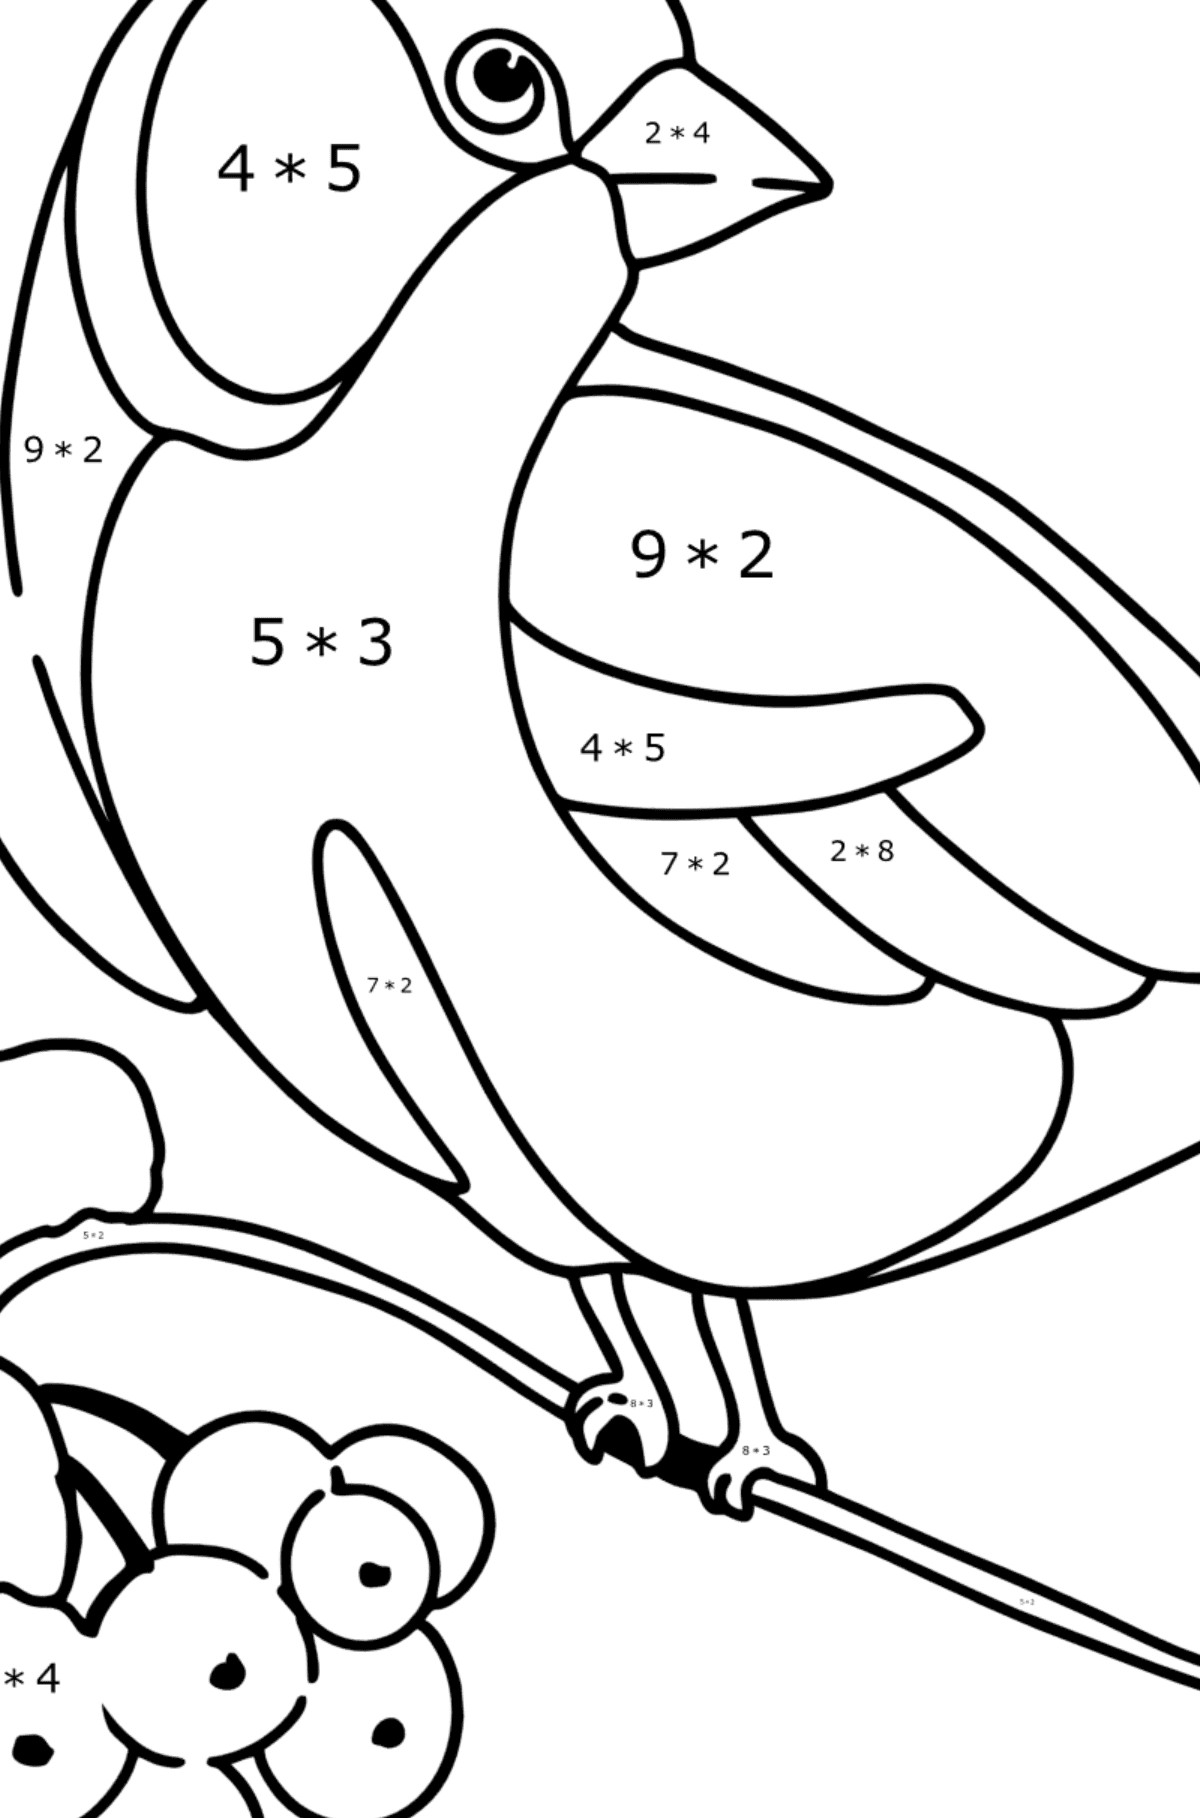 Coloring page - Titmouse on Mountain Ash - Math Coloring - Multiplication for Kids